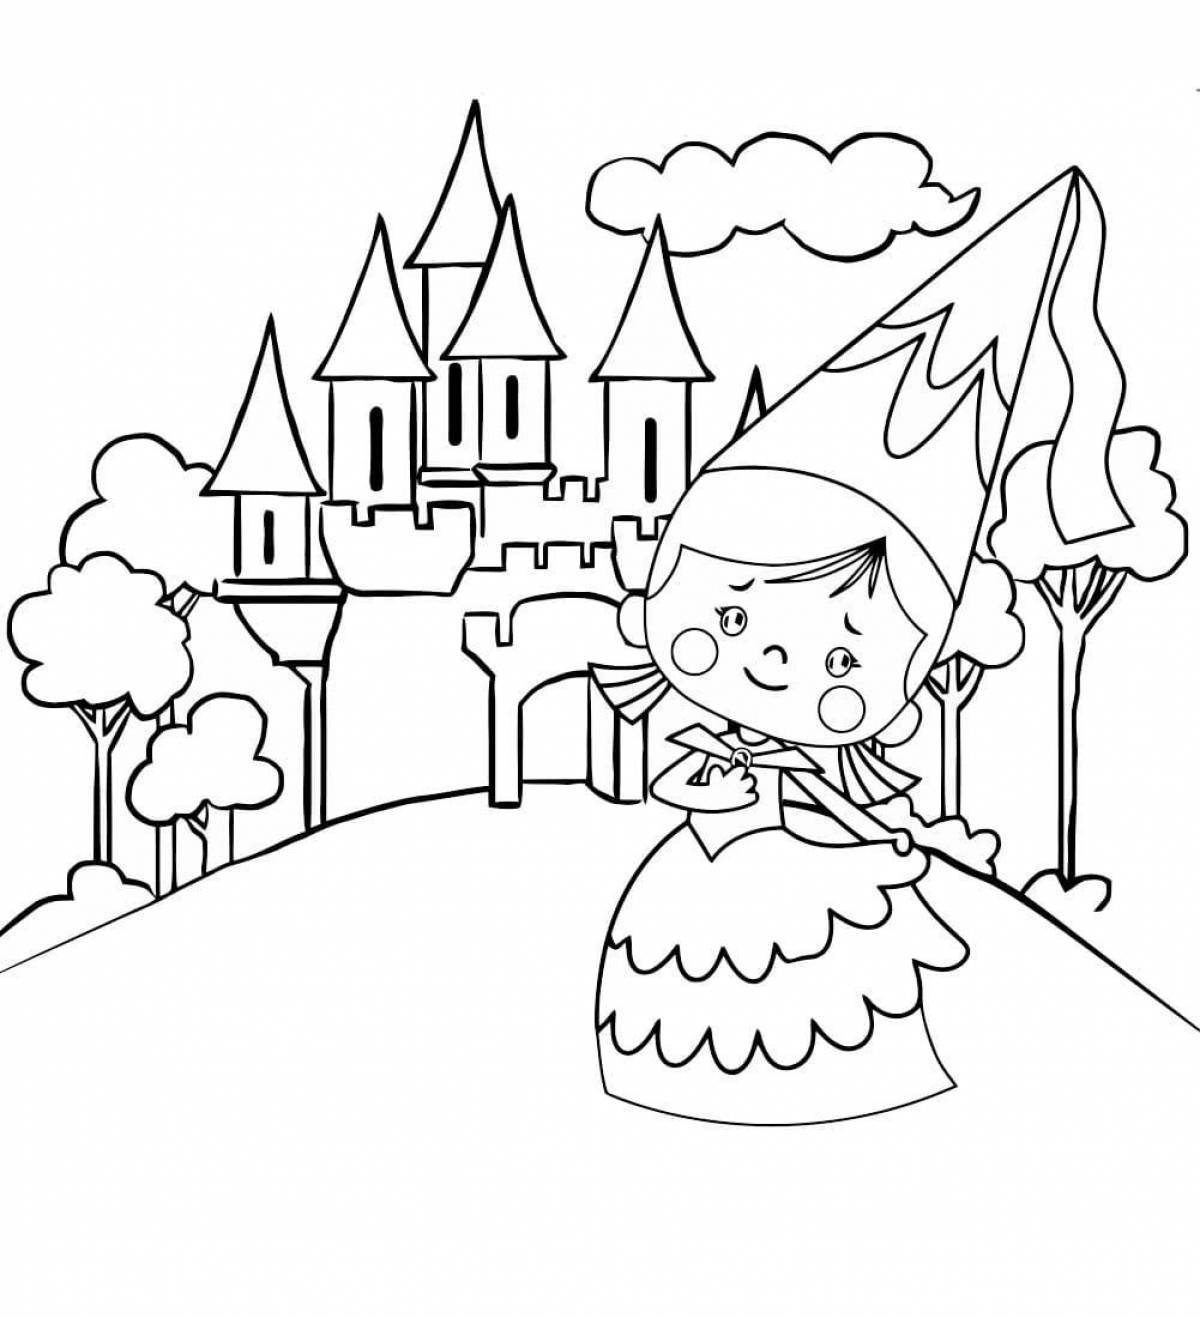 Coloring book of the castle of the magnanimous princess